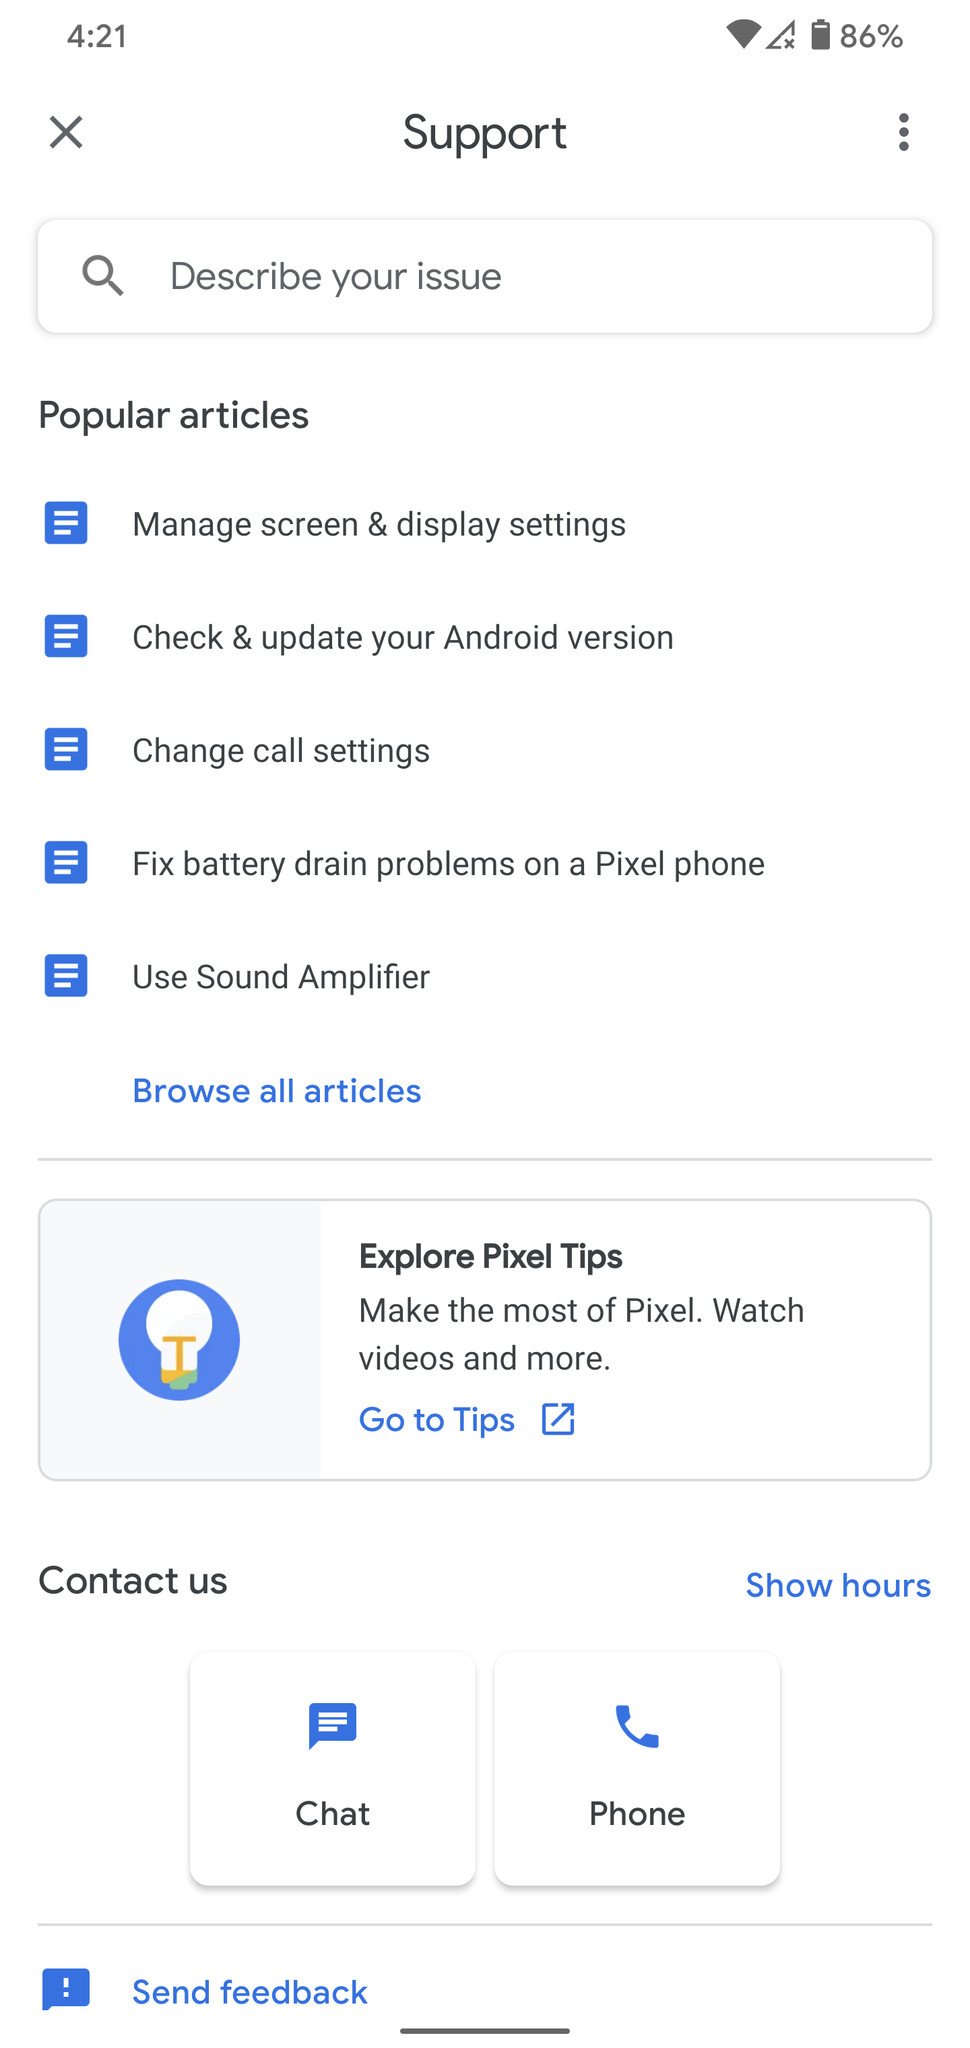 How To Contact Google About Issues With Your Pixel Phone